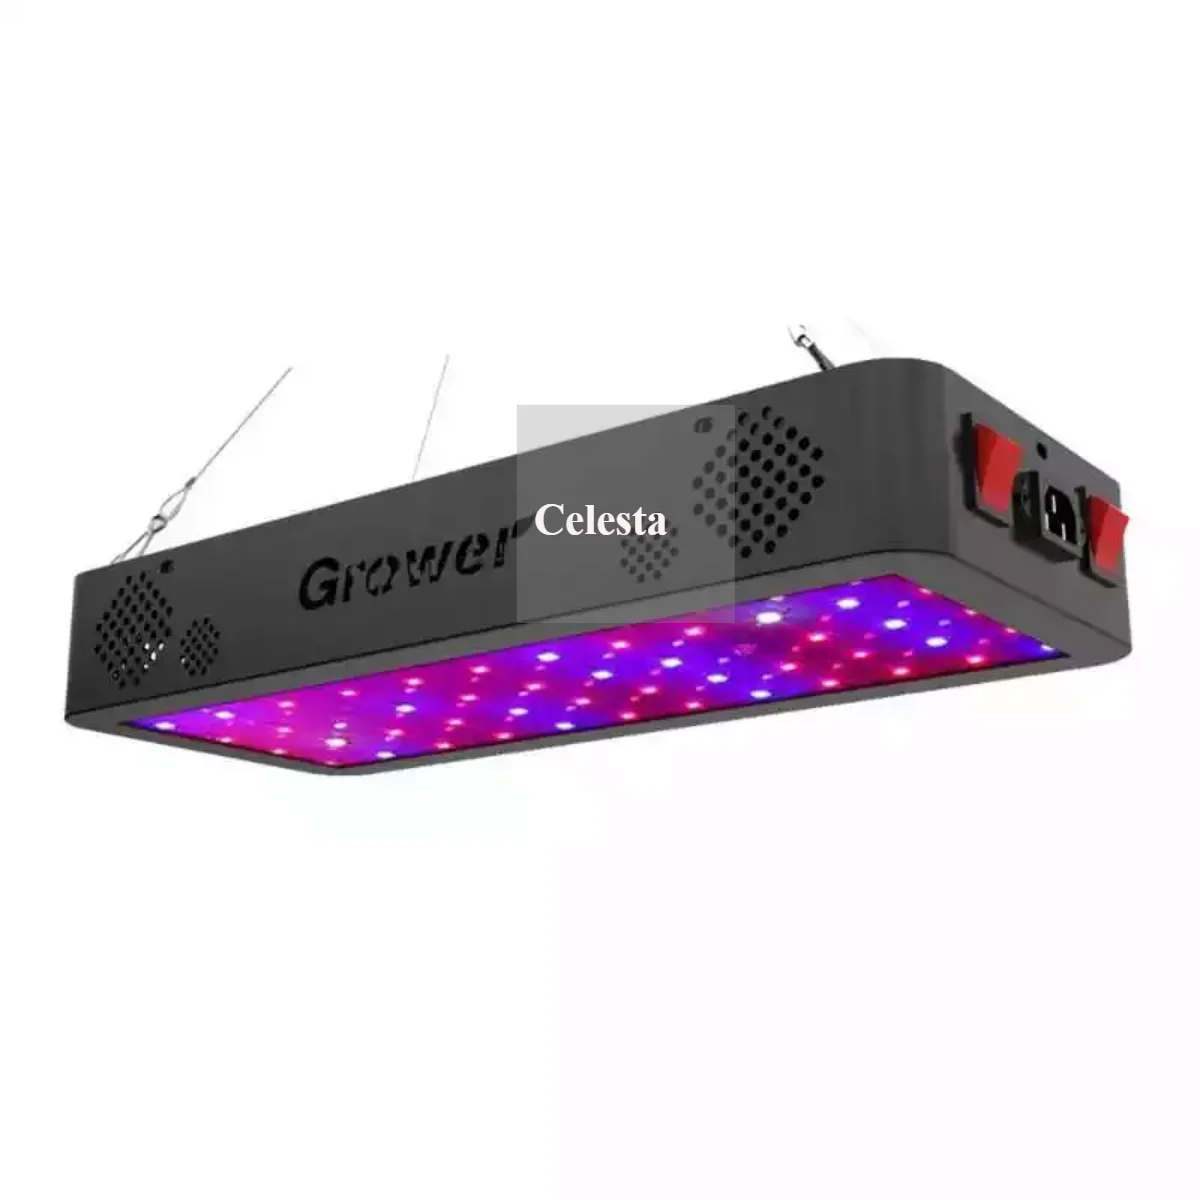 Hydroponics Low Power Consumption Led Grow Light 900w Led Grow Lights Cheap  Indoor Garden Growing Lighting Kit - Buy Hydroponics Low Power Consumption  Led Grow Light,900w Led Grow Lights,Cheap Led Grow Lights